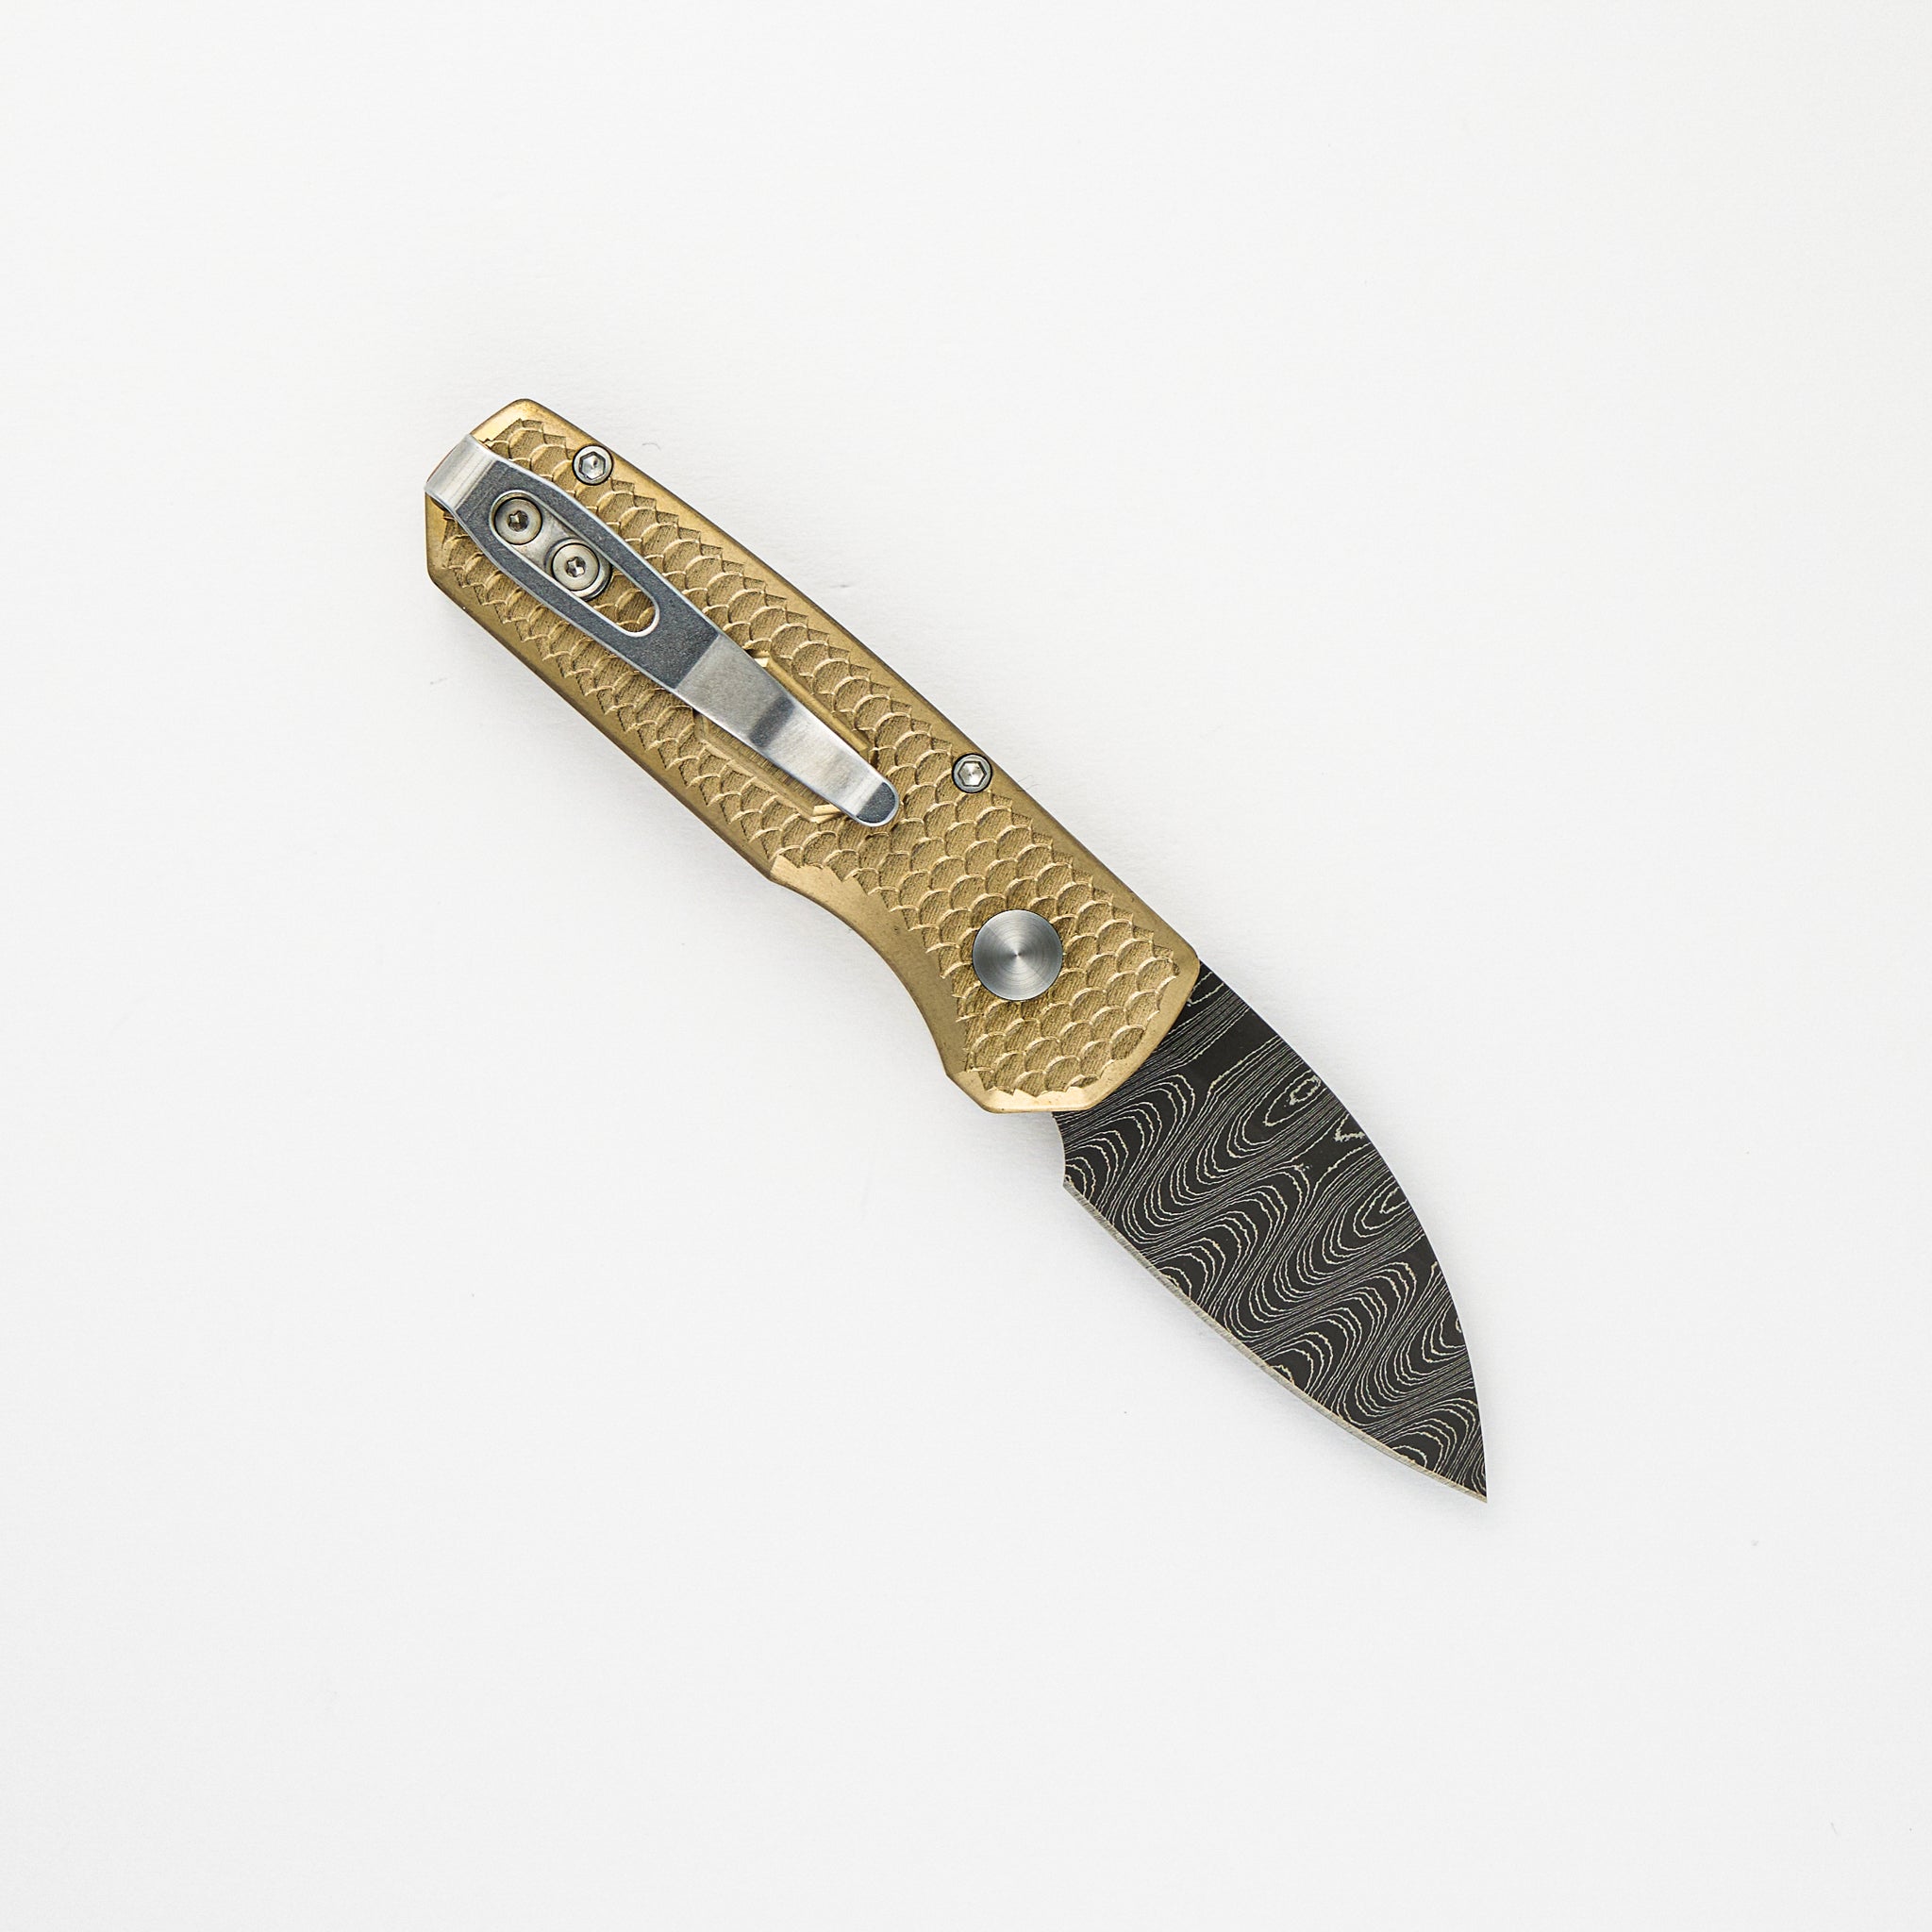 Pro-Tech Knives Runt 5 Limited - Machined Dragon Scale Brass Handle – Chad Nichols Wharncliffe Blade